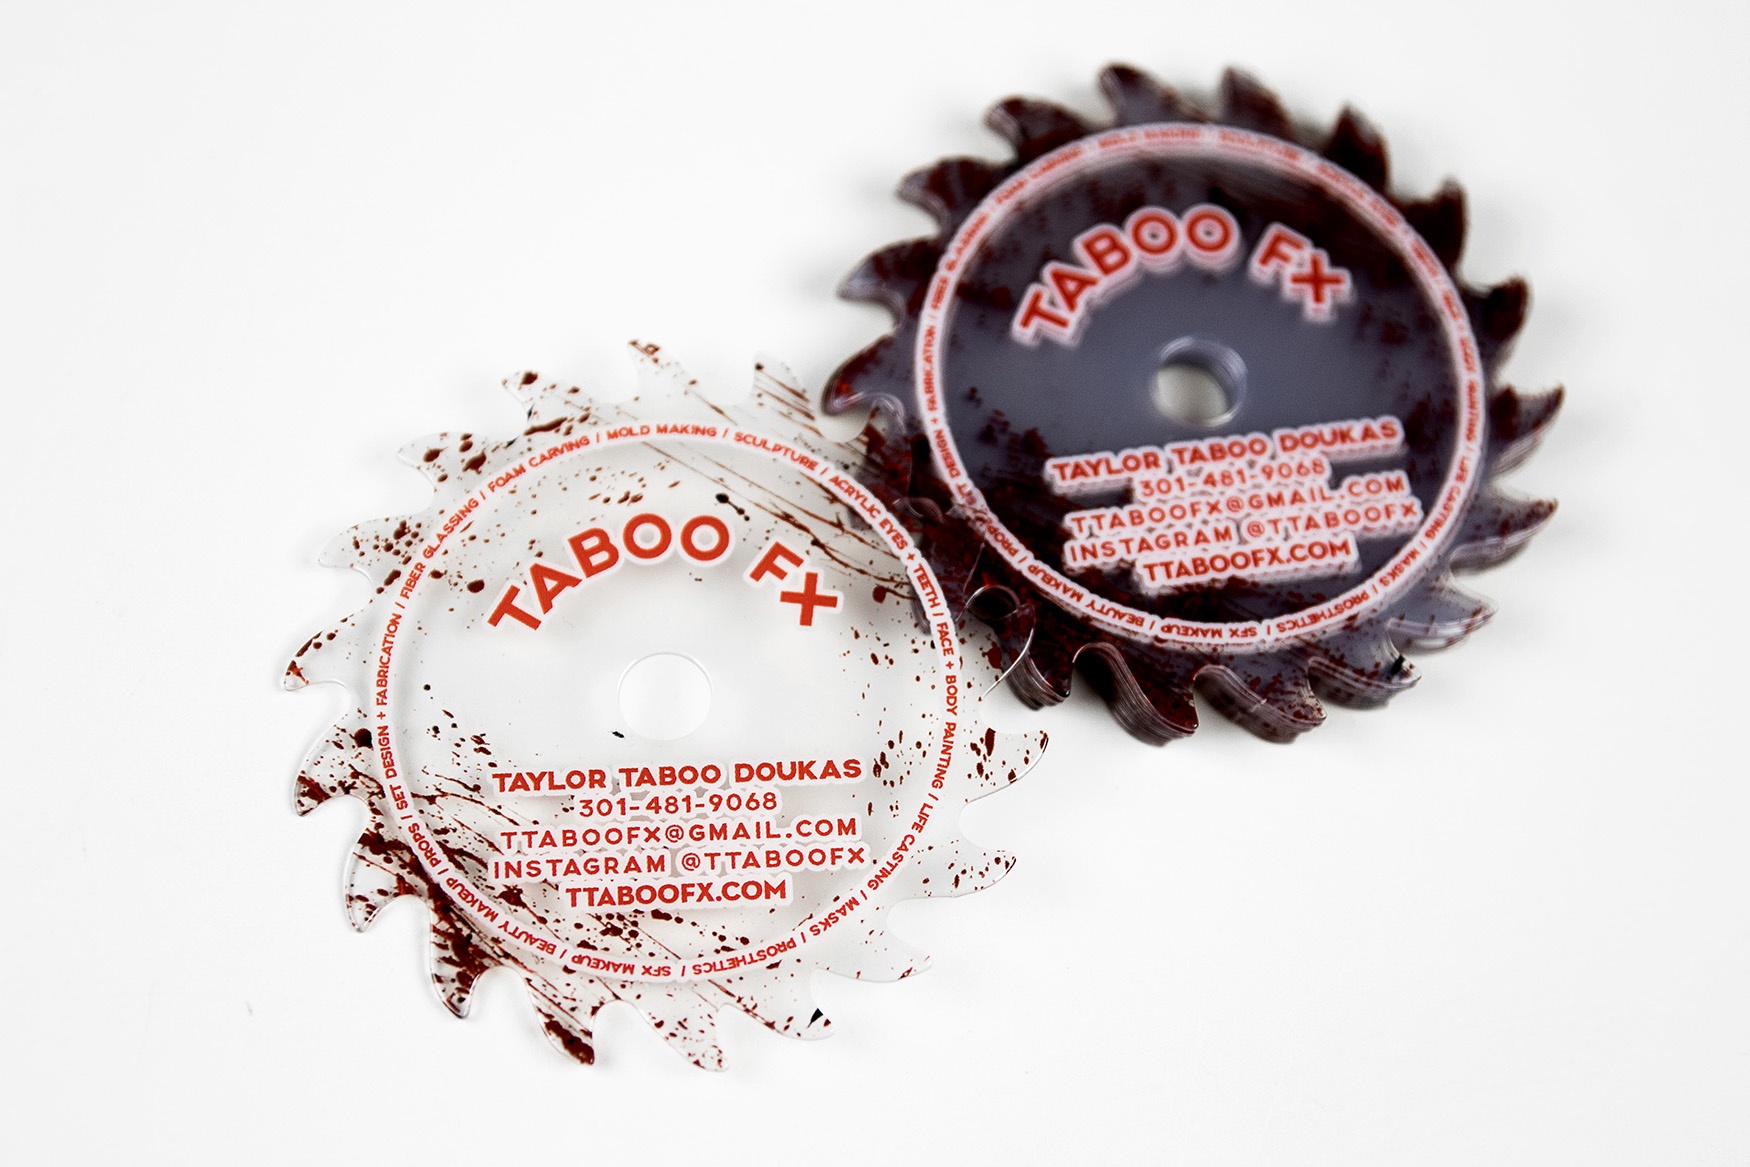 Taboo FX Business Cards